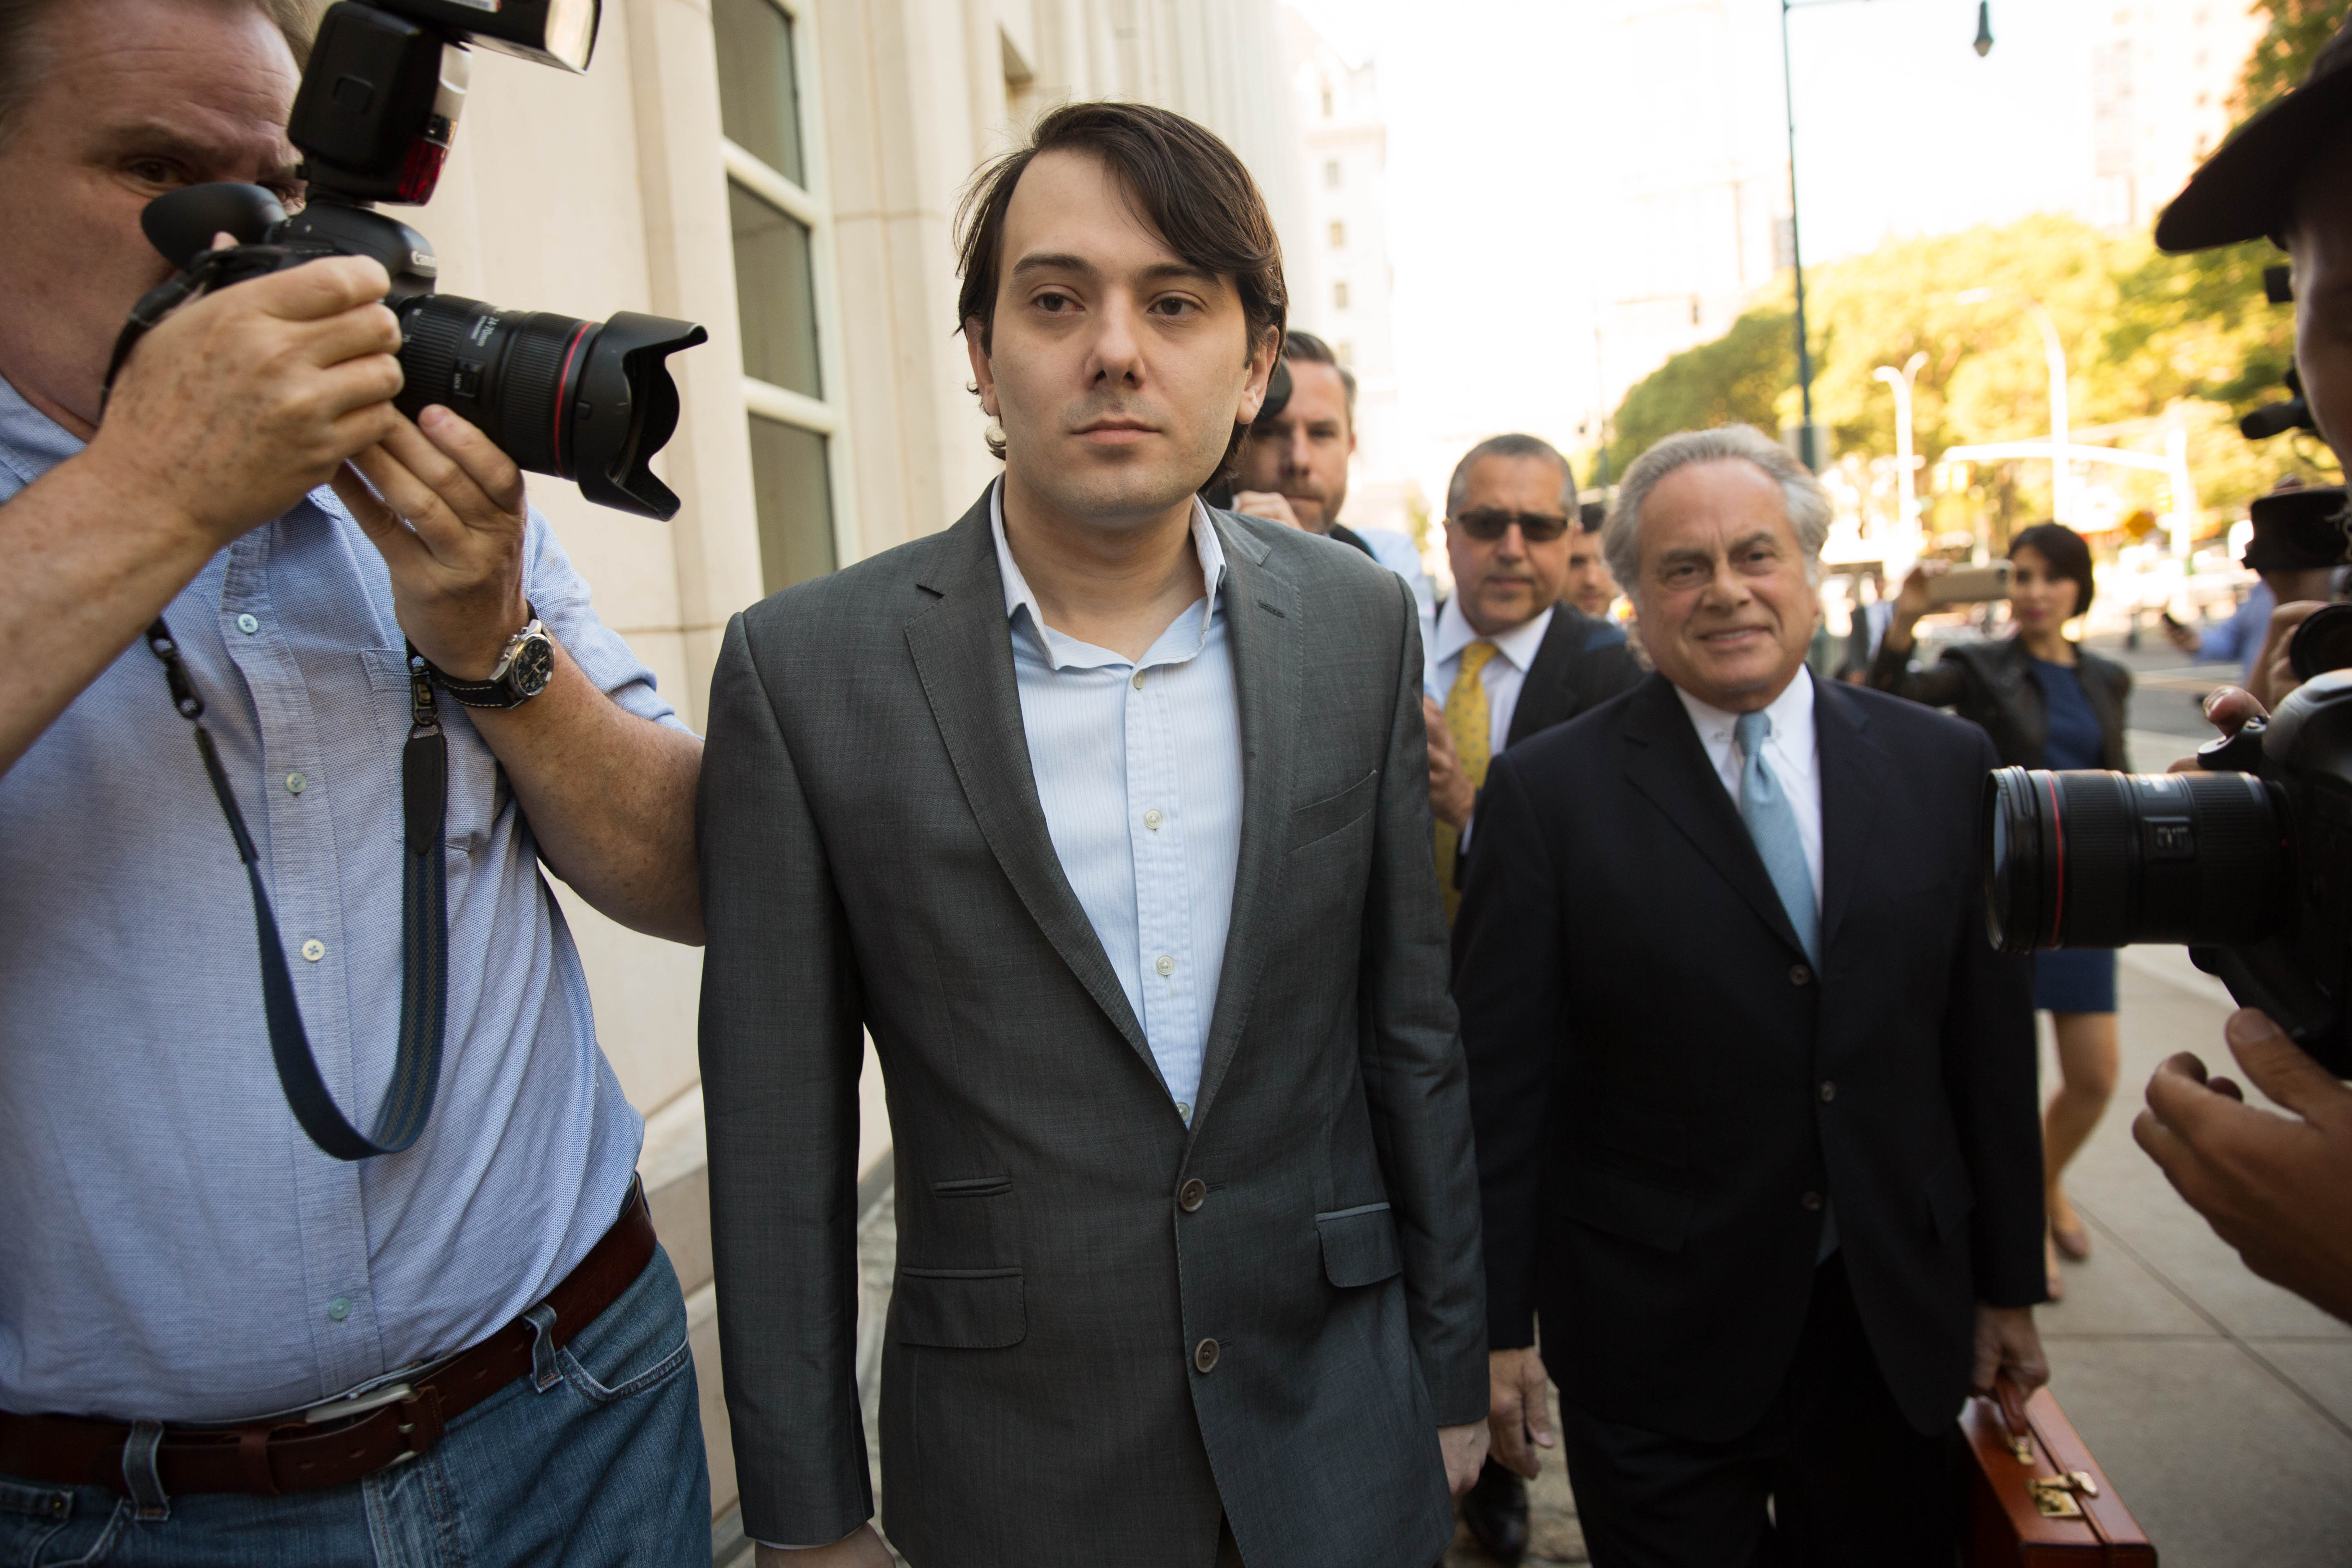 Martin Shkreli Sentenced To 7 Years In Federal Prison